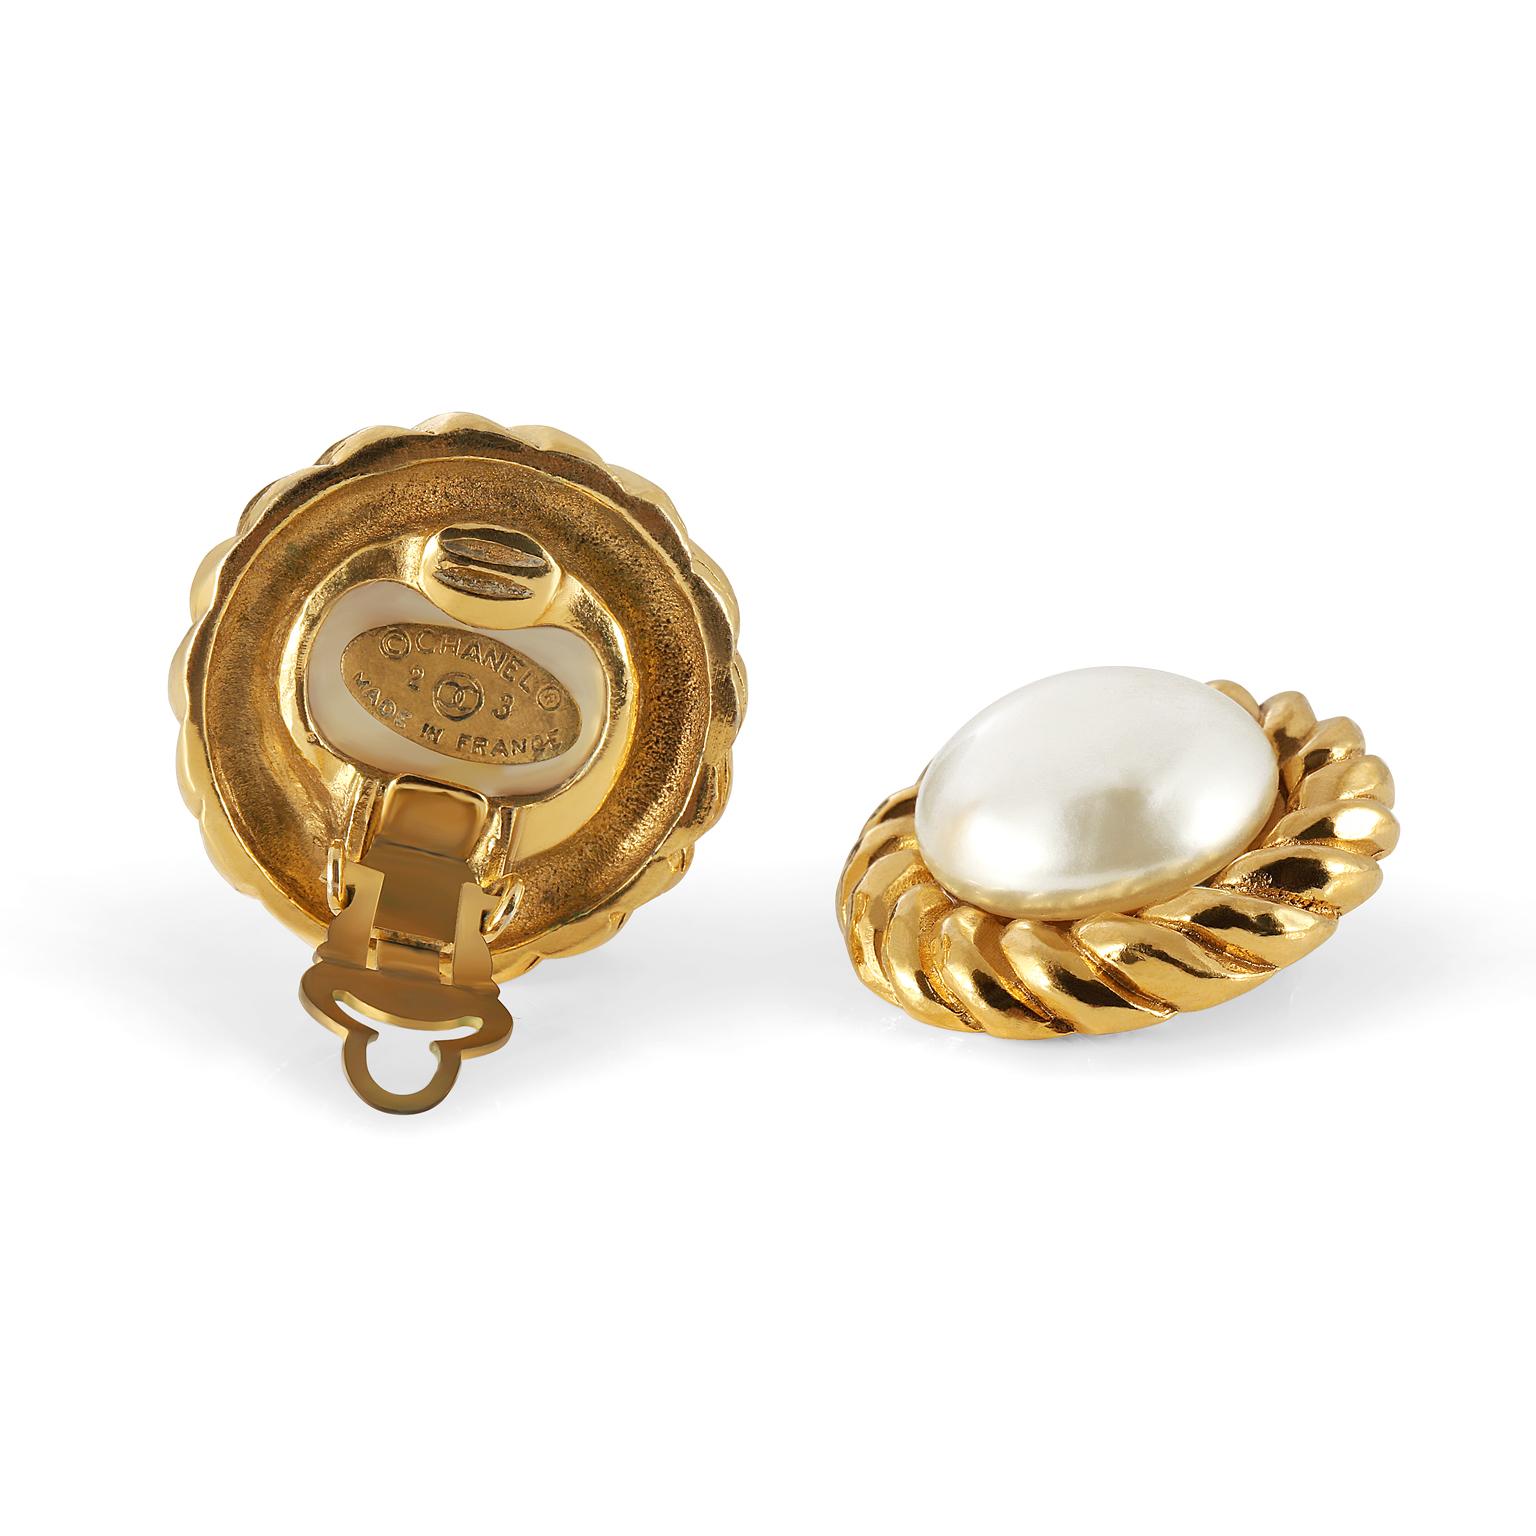 These authentic Chanel Pearl with Rope Surround Earrings are in very good vintage condition from the mid 19080’s.  Large round faux pearl is surrounded by gold rope motif.   Clip on closure. Made in France.
